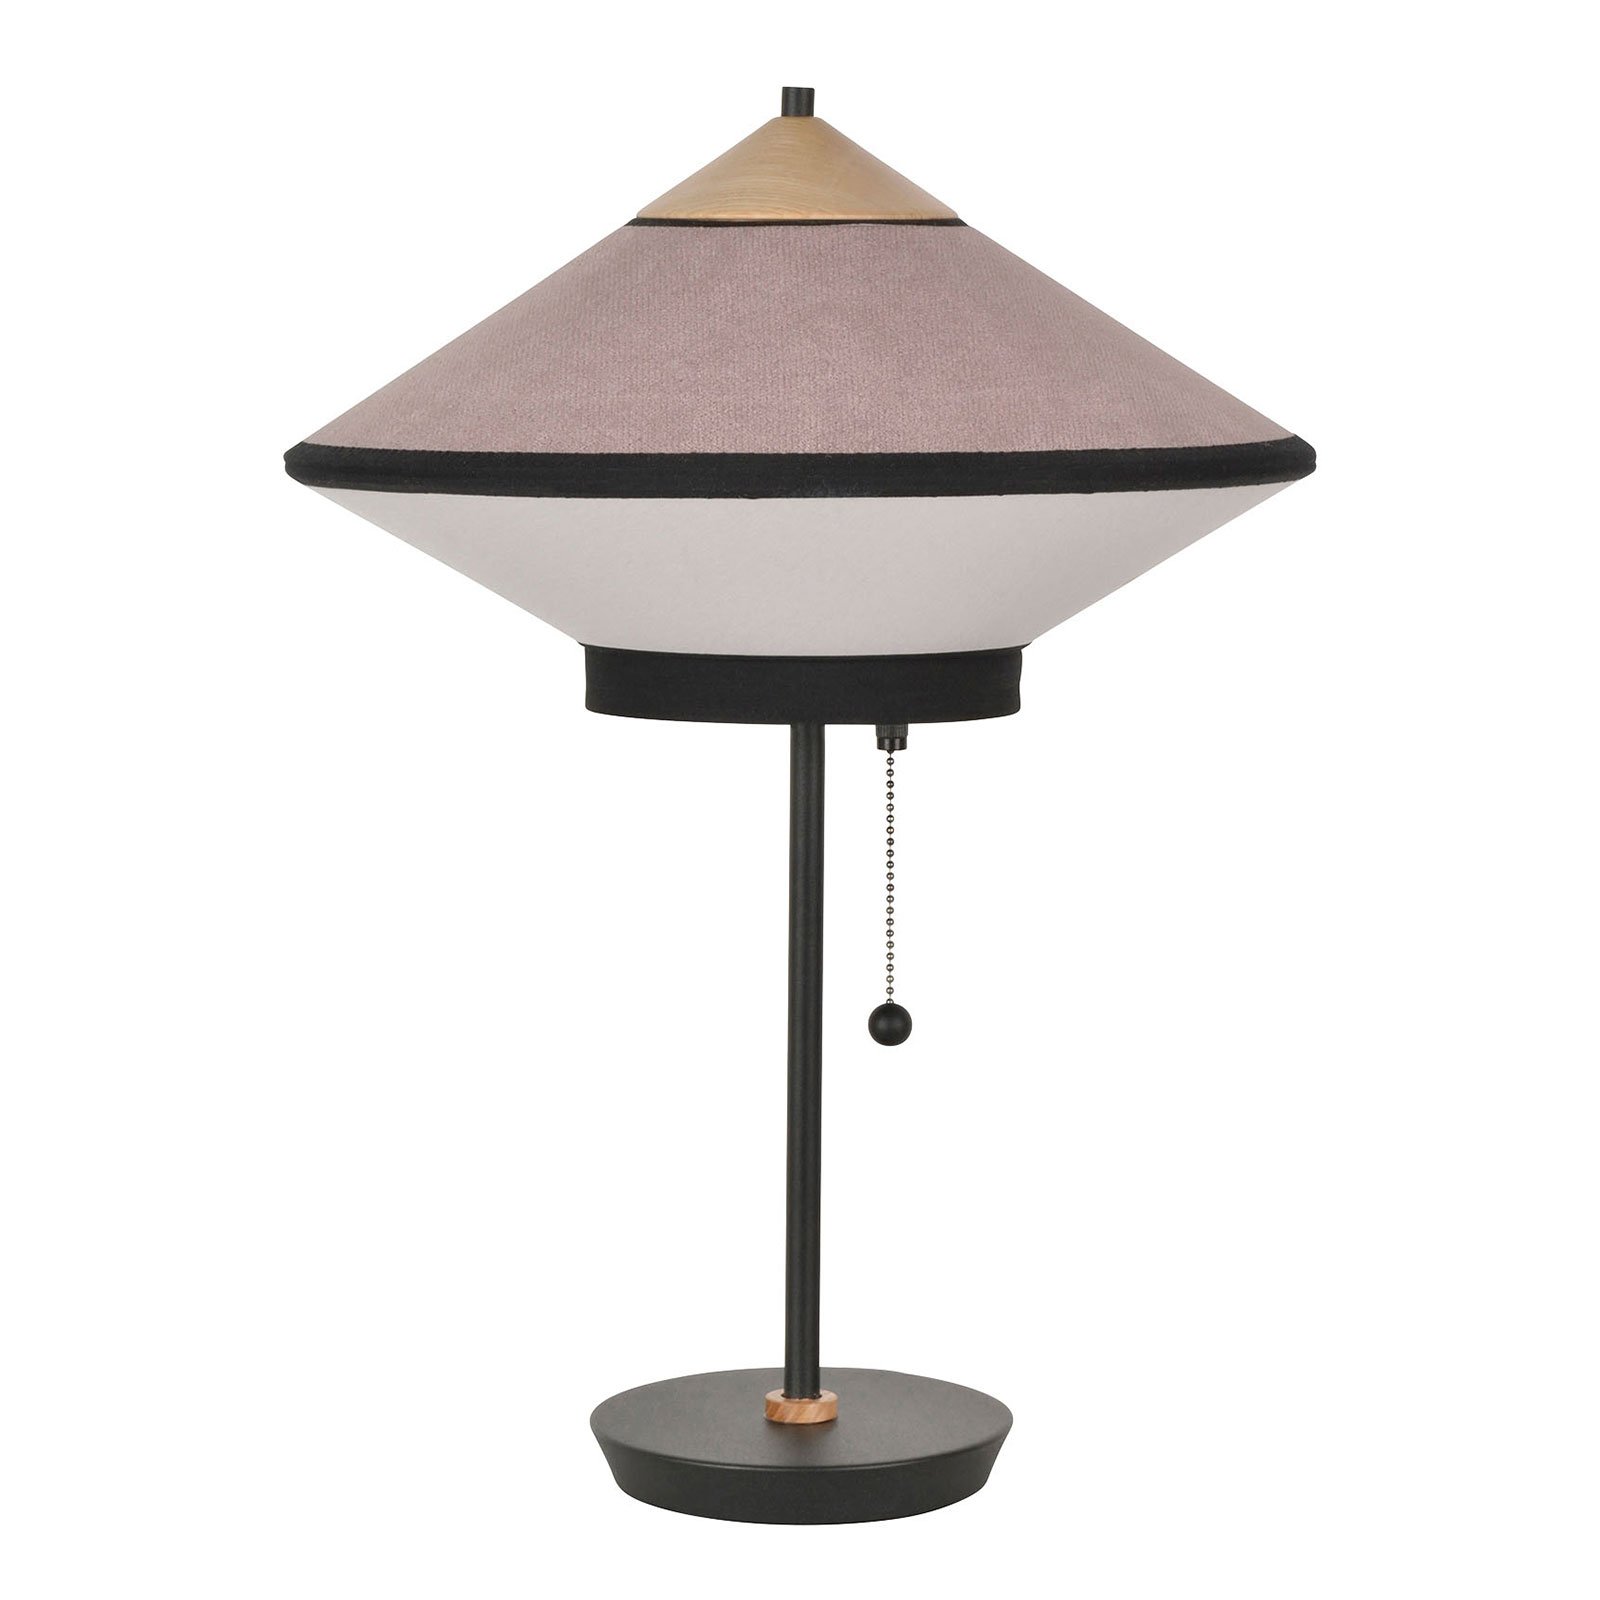 Stolna lampa Forestier Cymbal S, puder roza